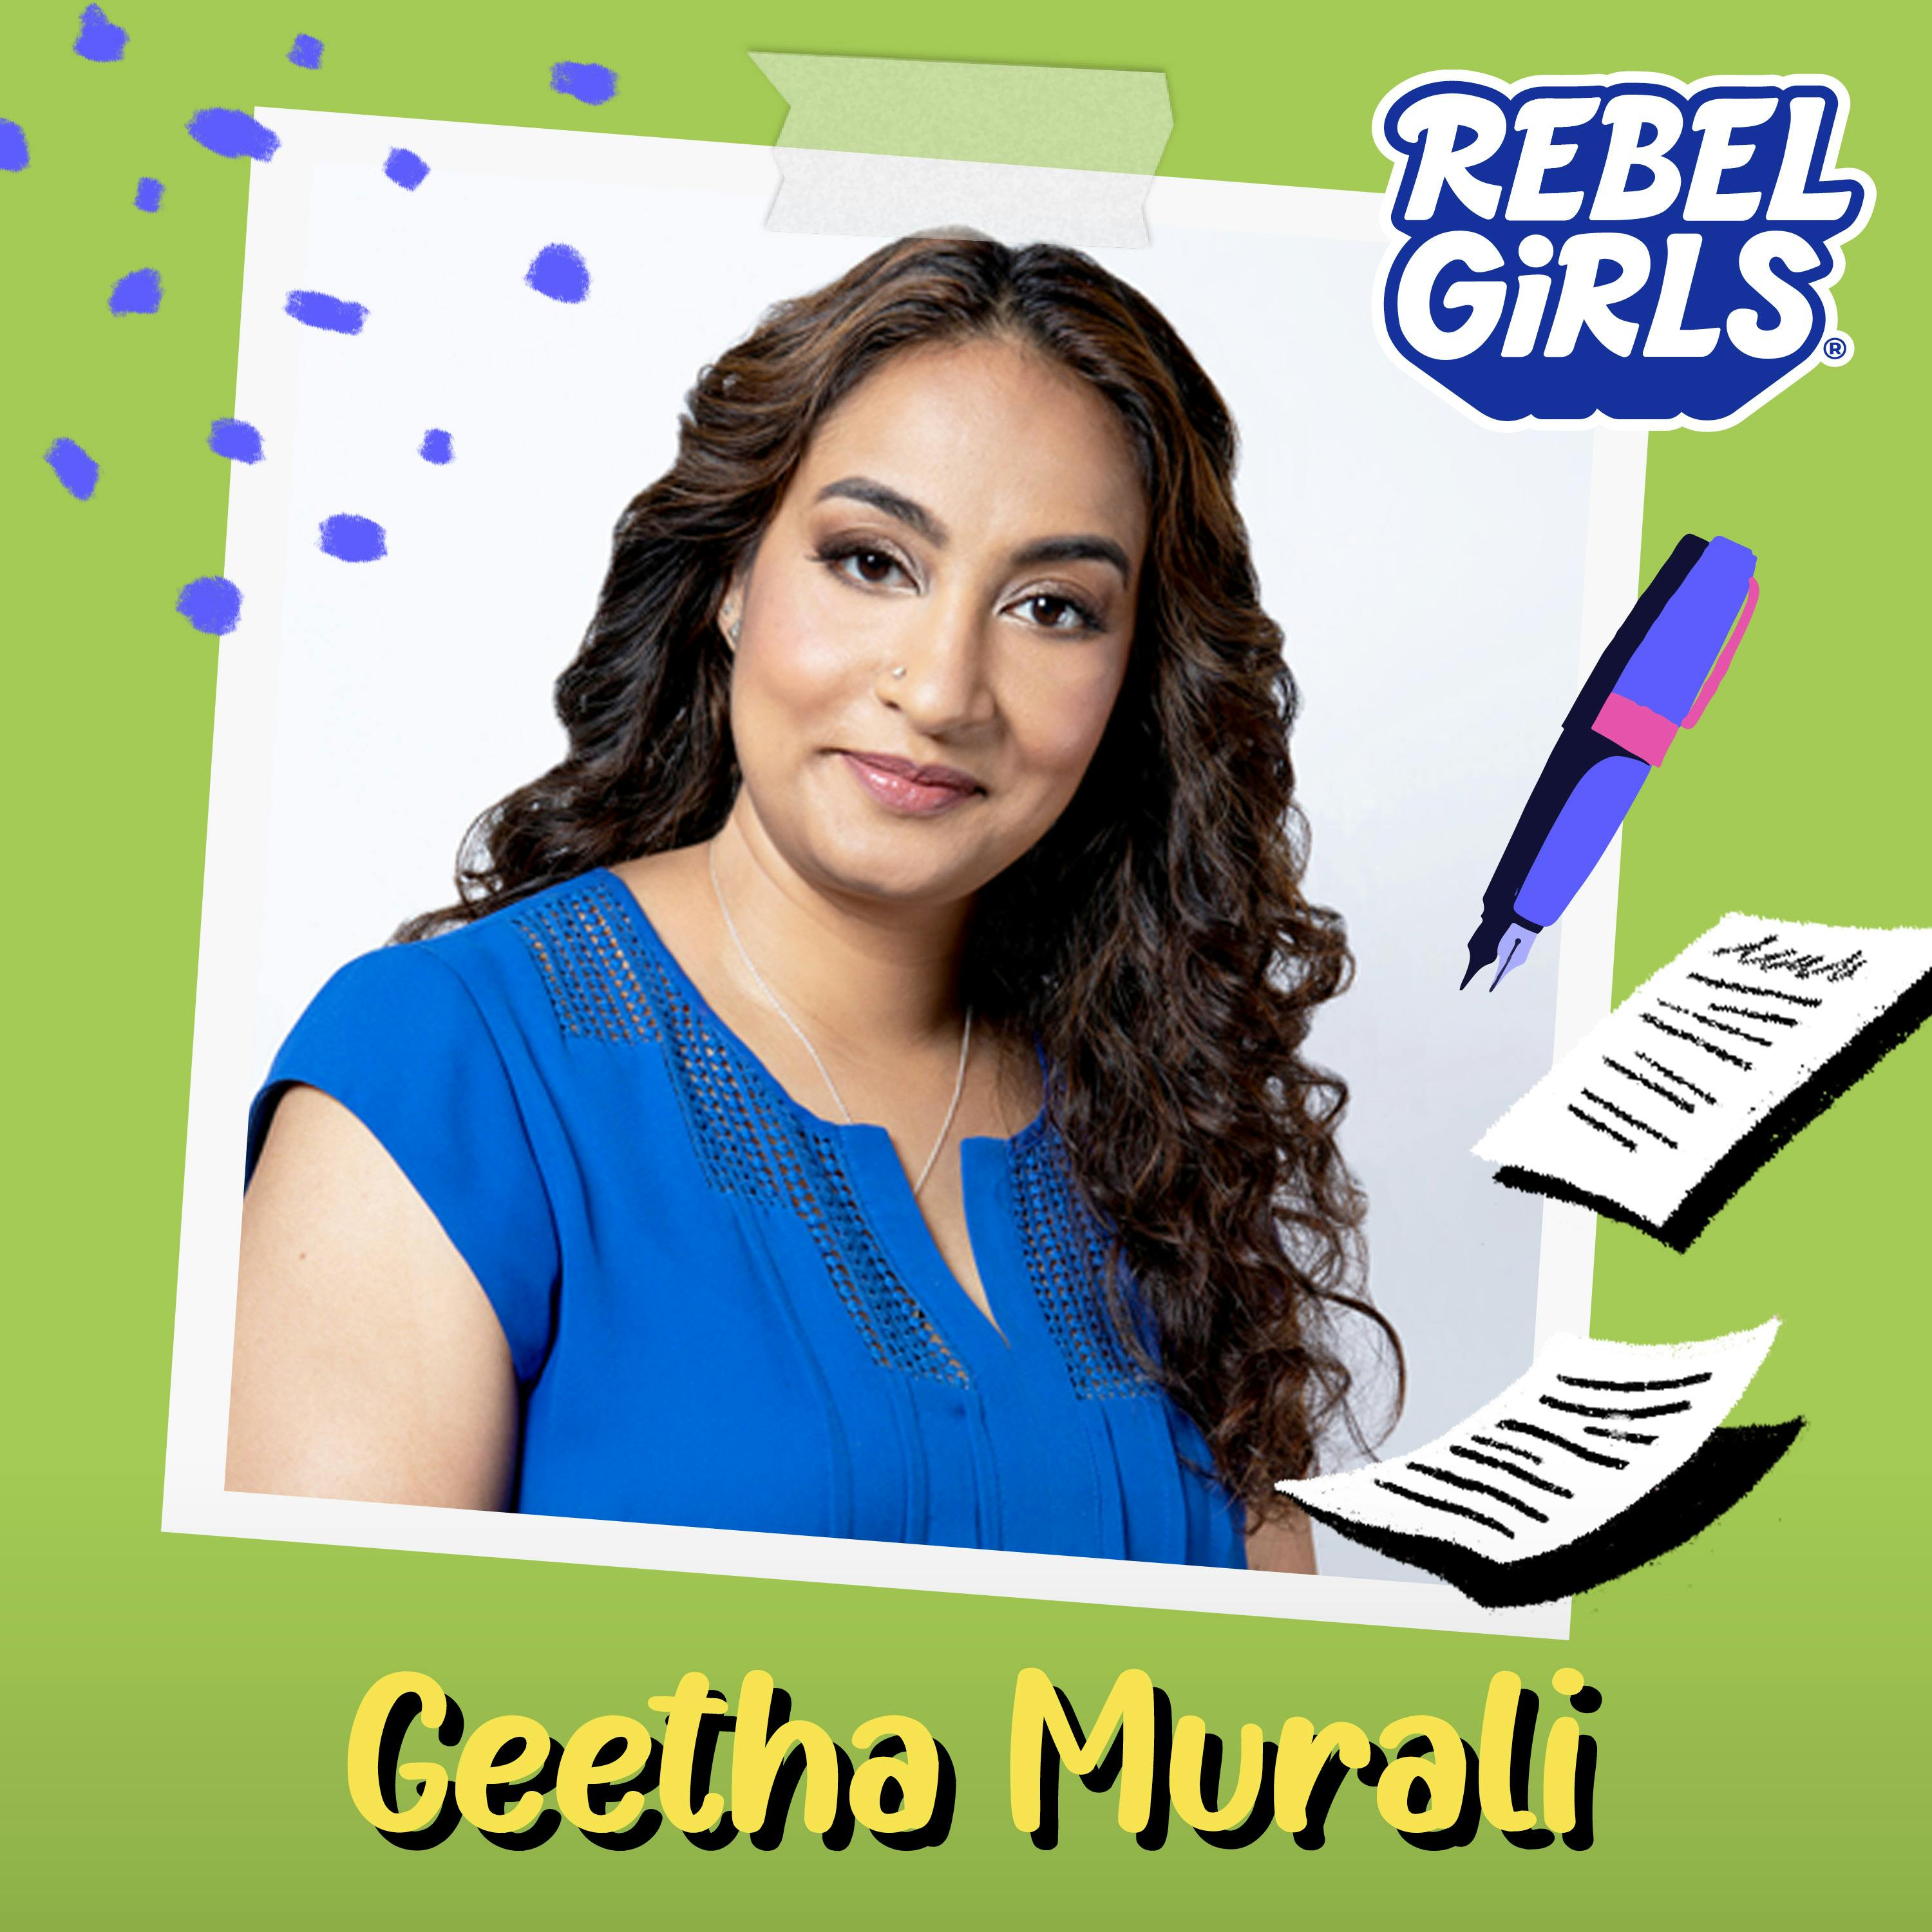 Get to Know Geetha Murali